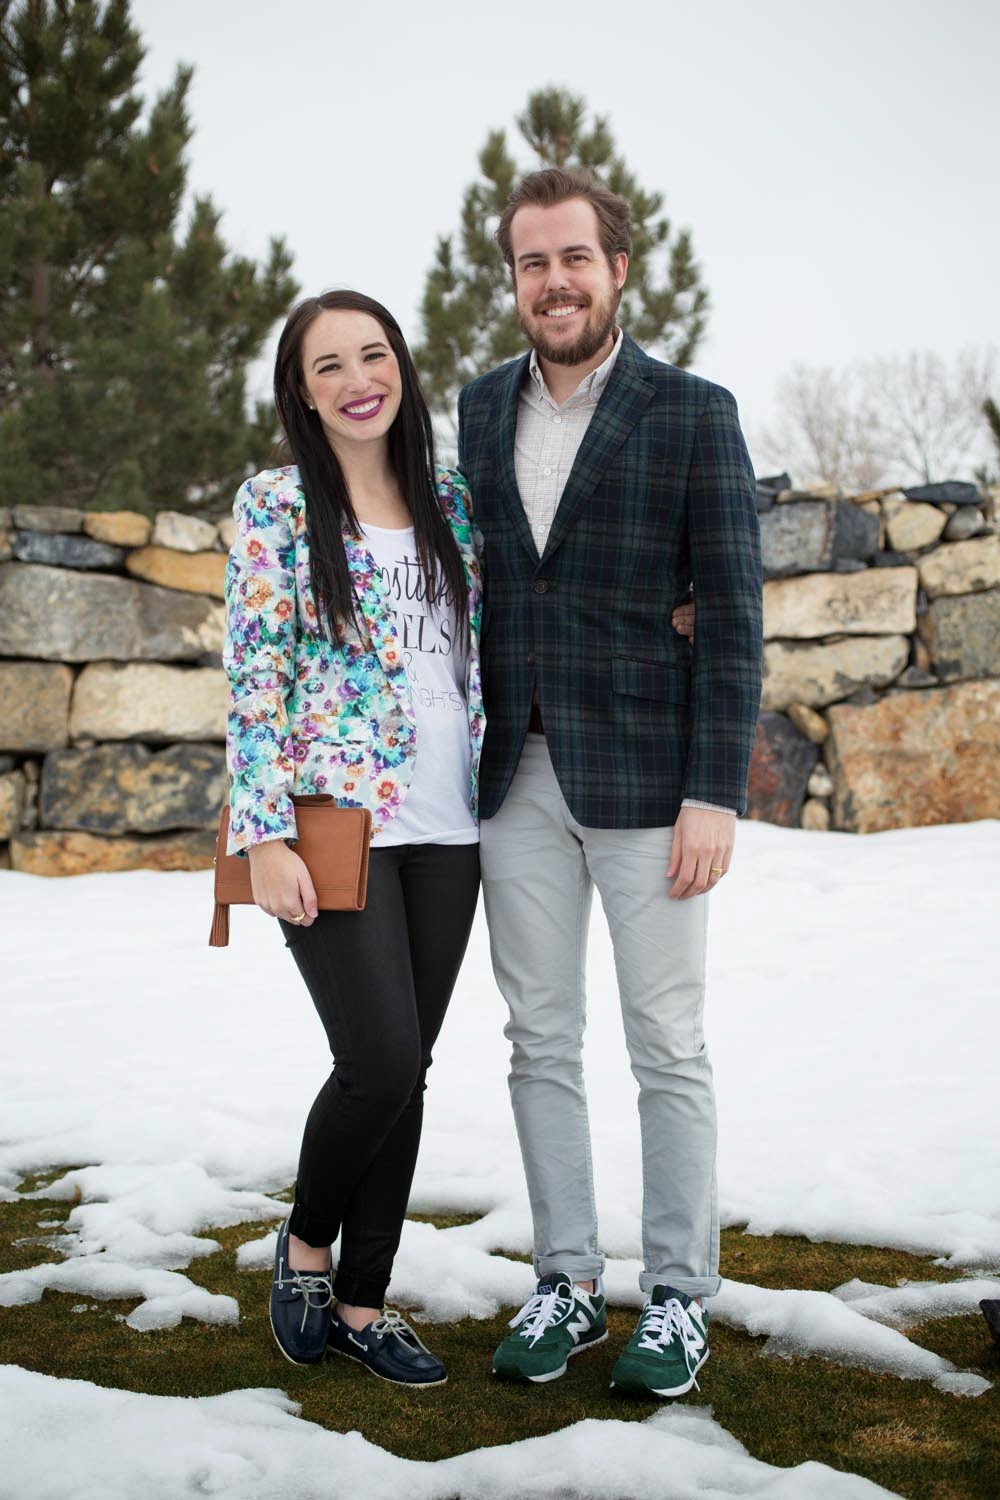 kelseybang.com - a his and her style blog